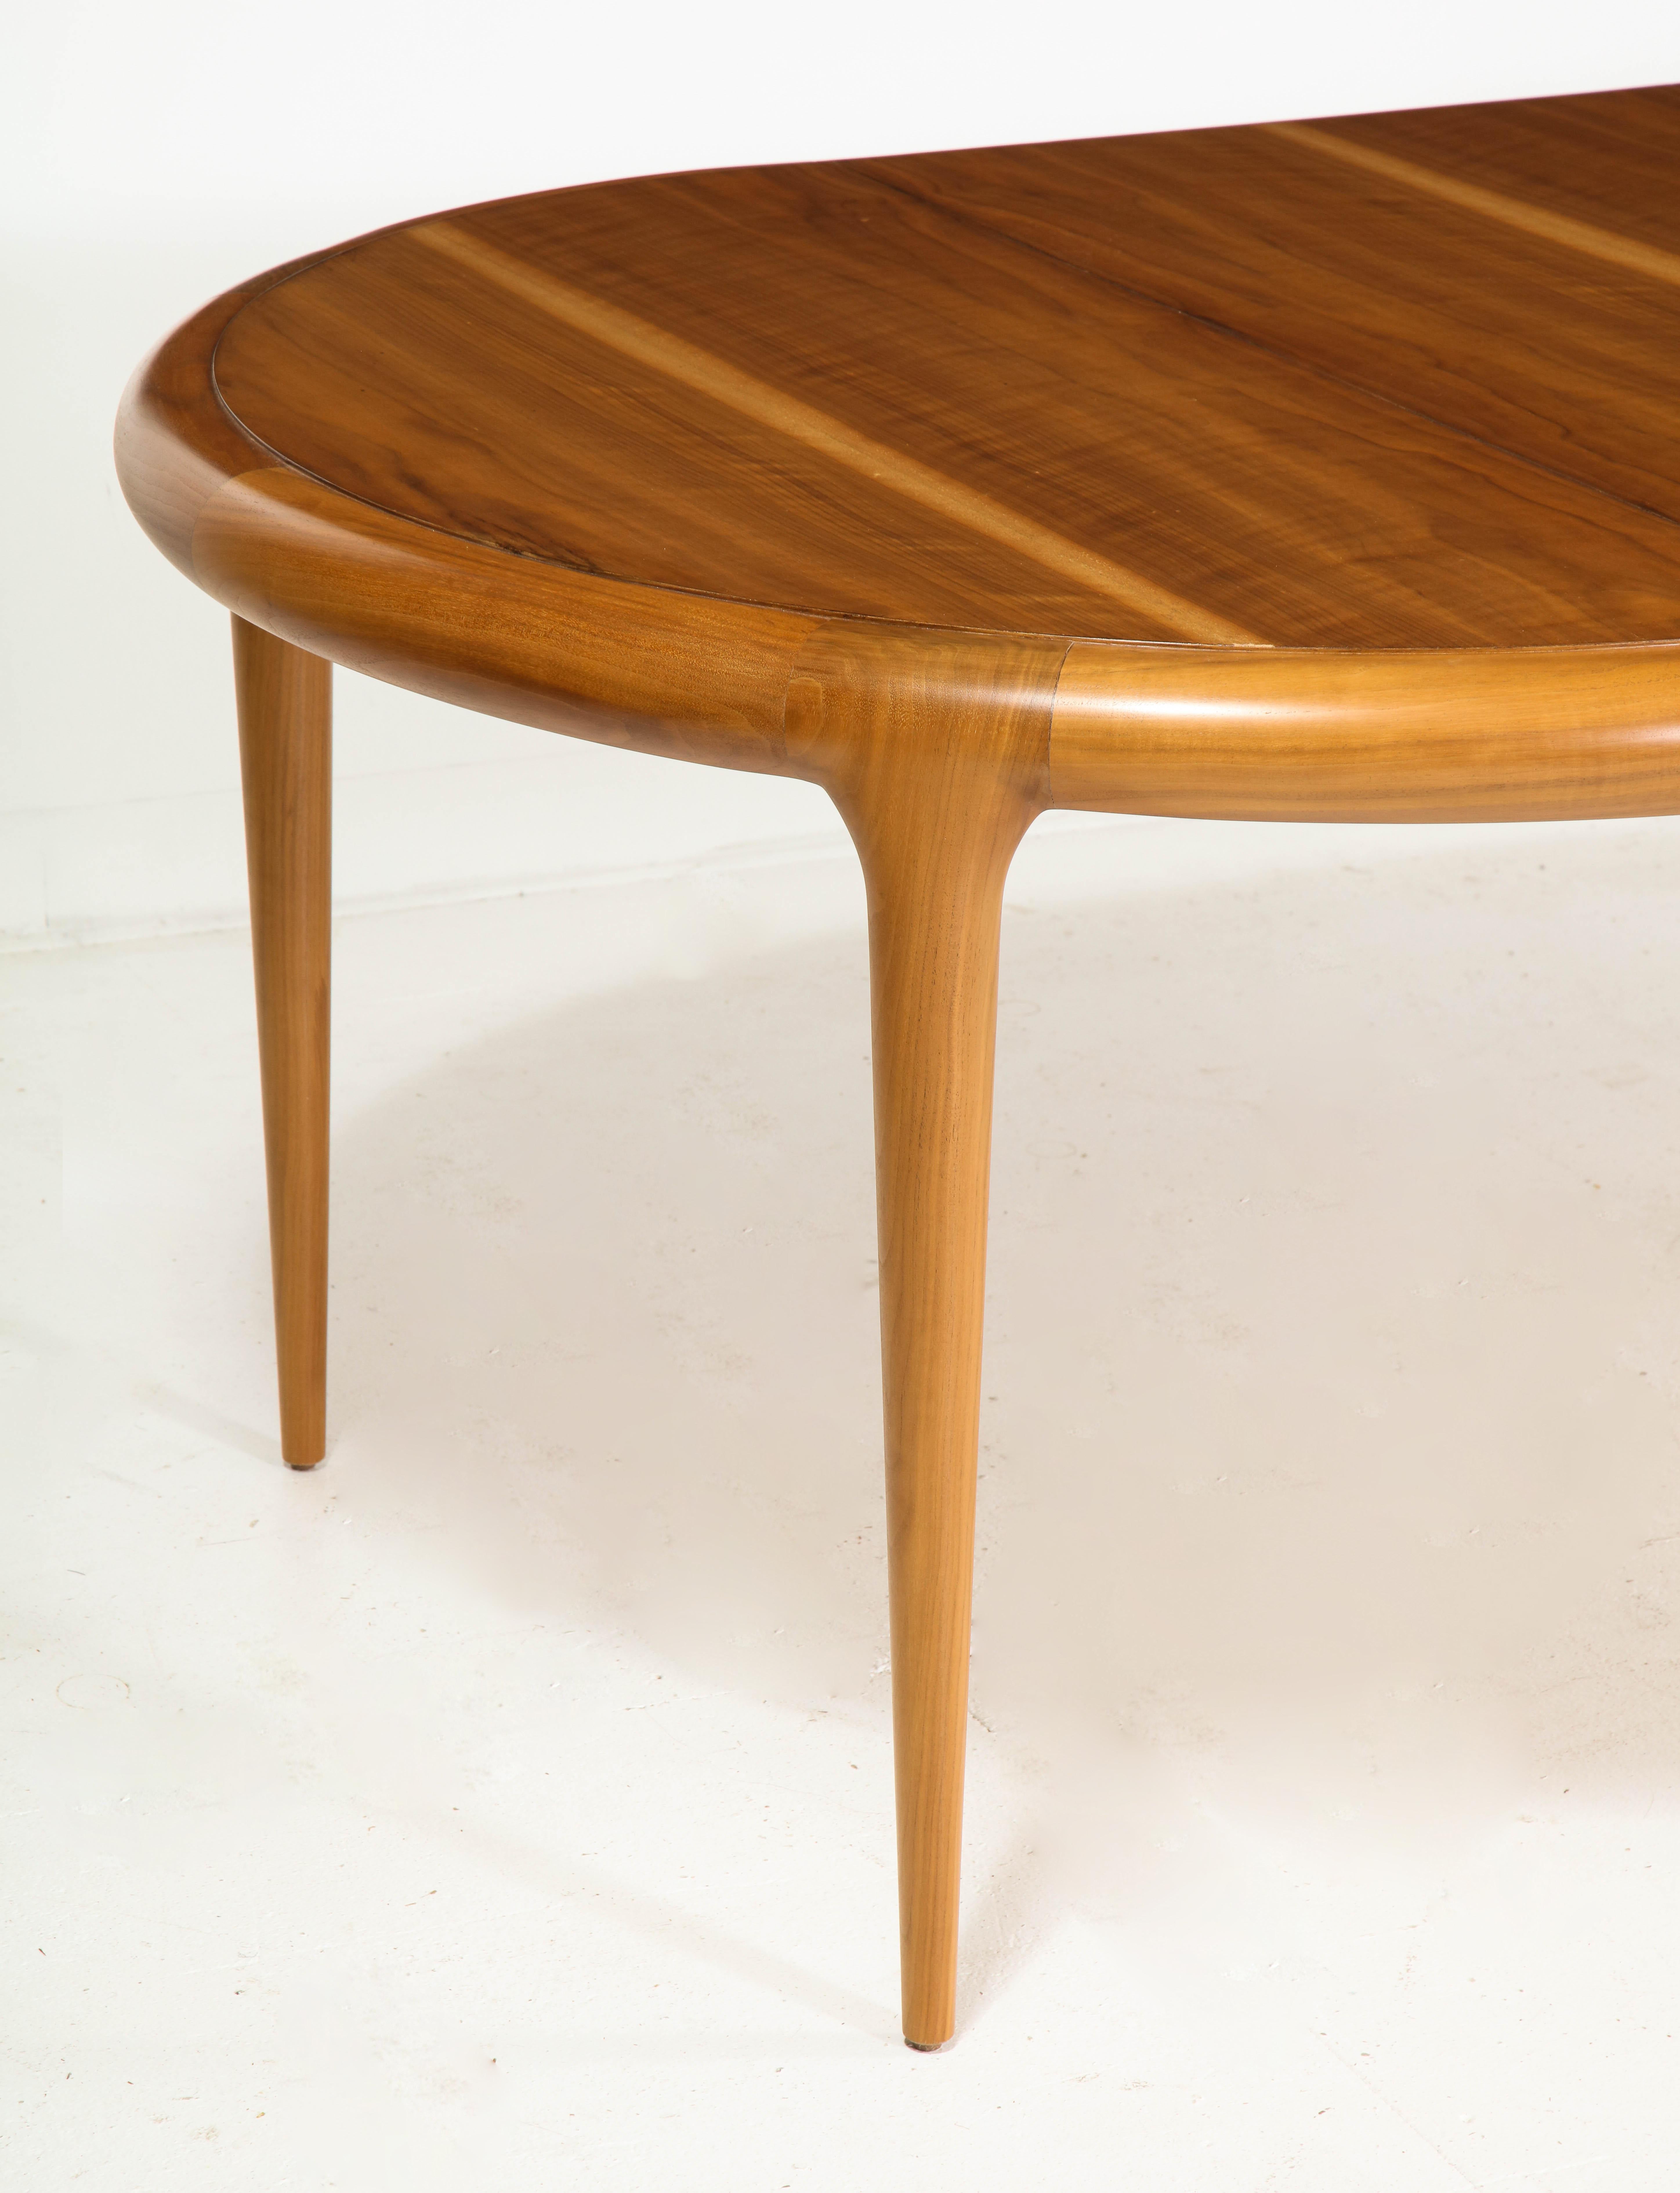 Modern Round Extension Dining Table in Wood Offered by Vladimir Kagan Design Group